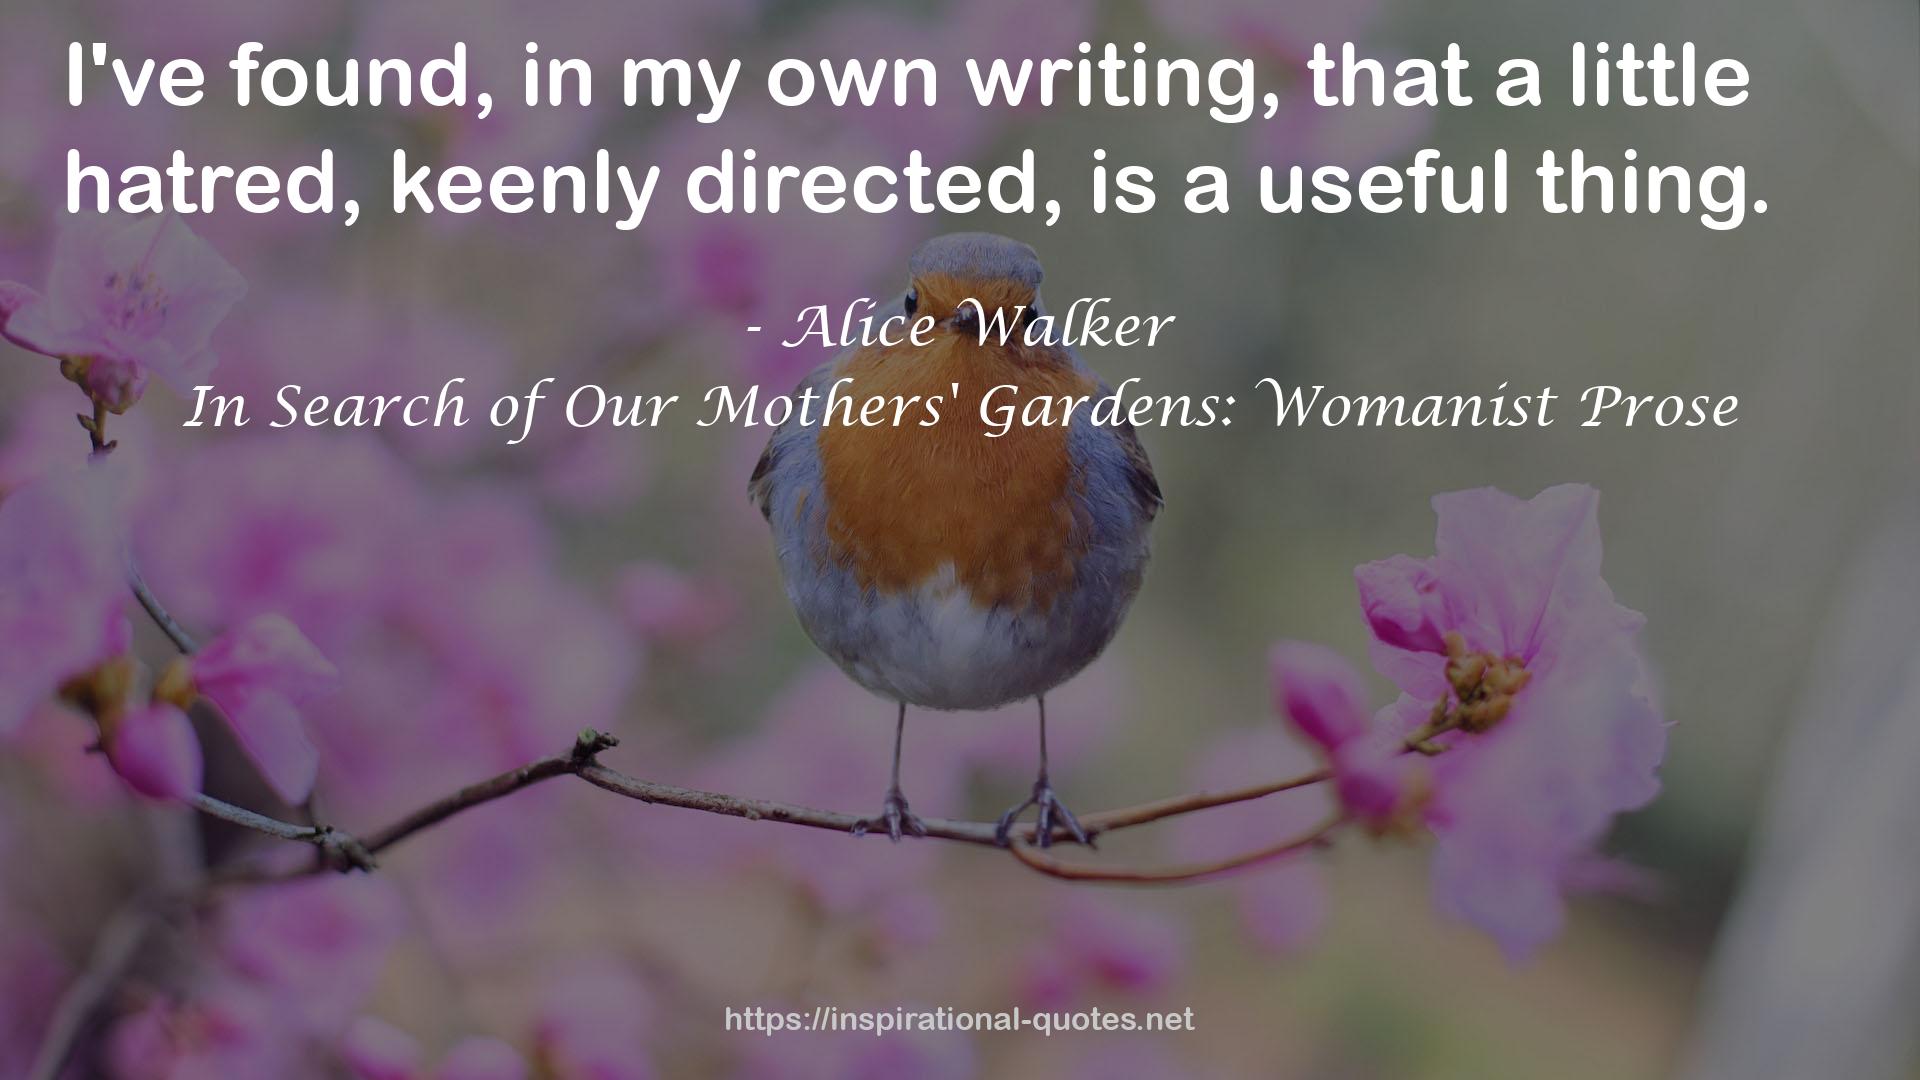 In Search of Our Mothers' Gardens: Womanist Prose QUOTES